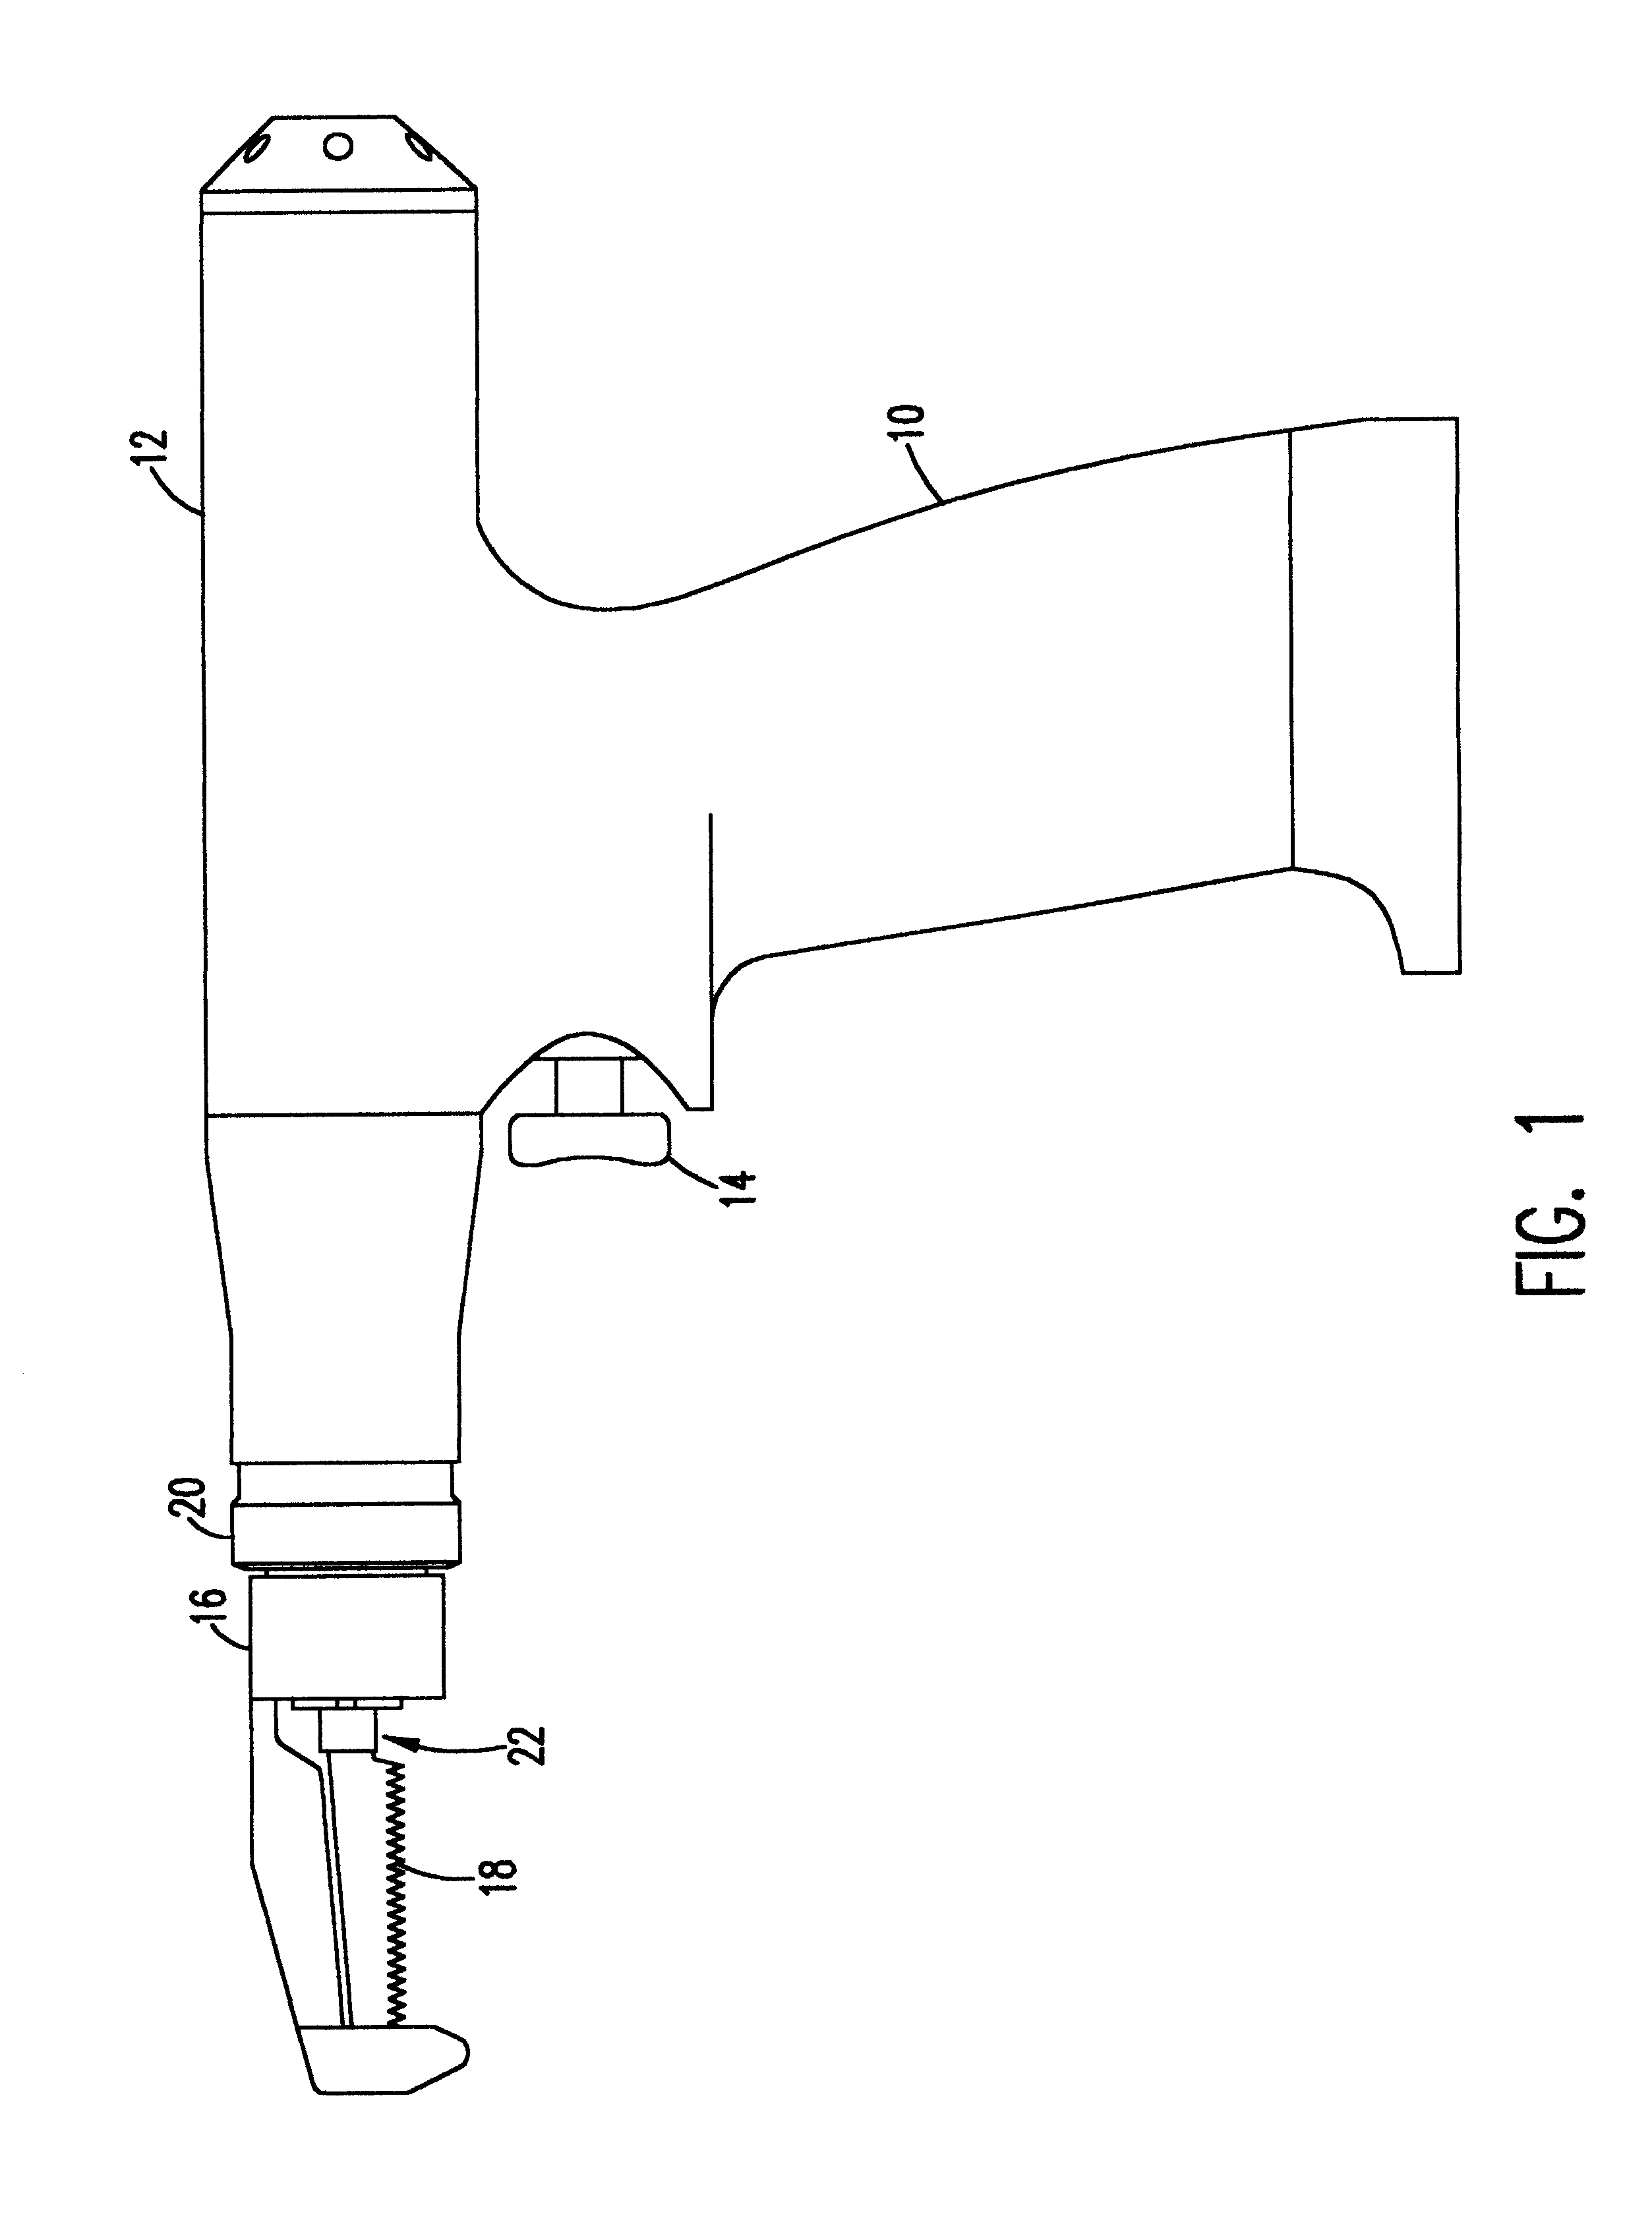 Connector assembly for a surgical saw blade